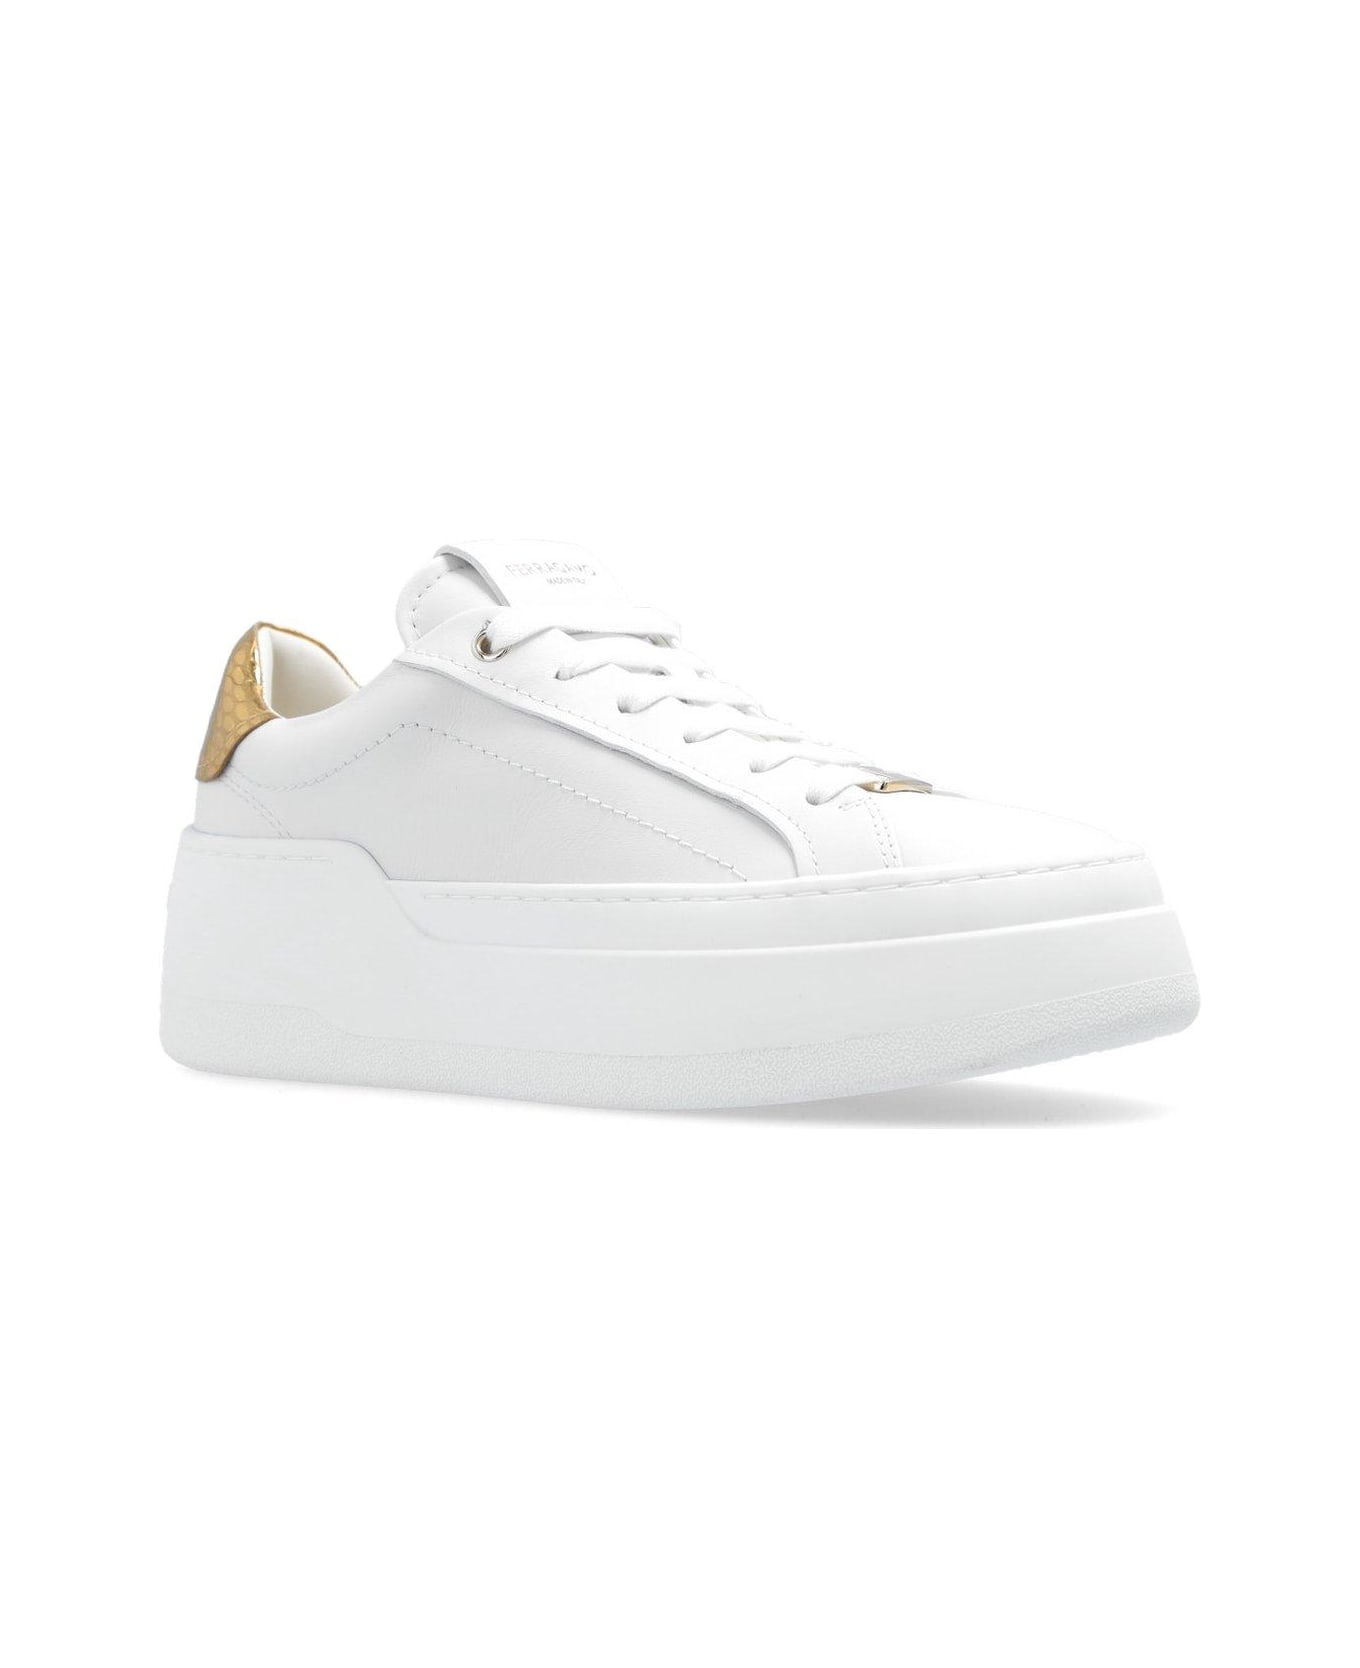 Ferragamo Lace-up Wedge Sneakers - White